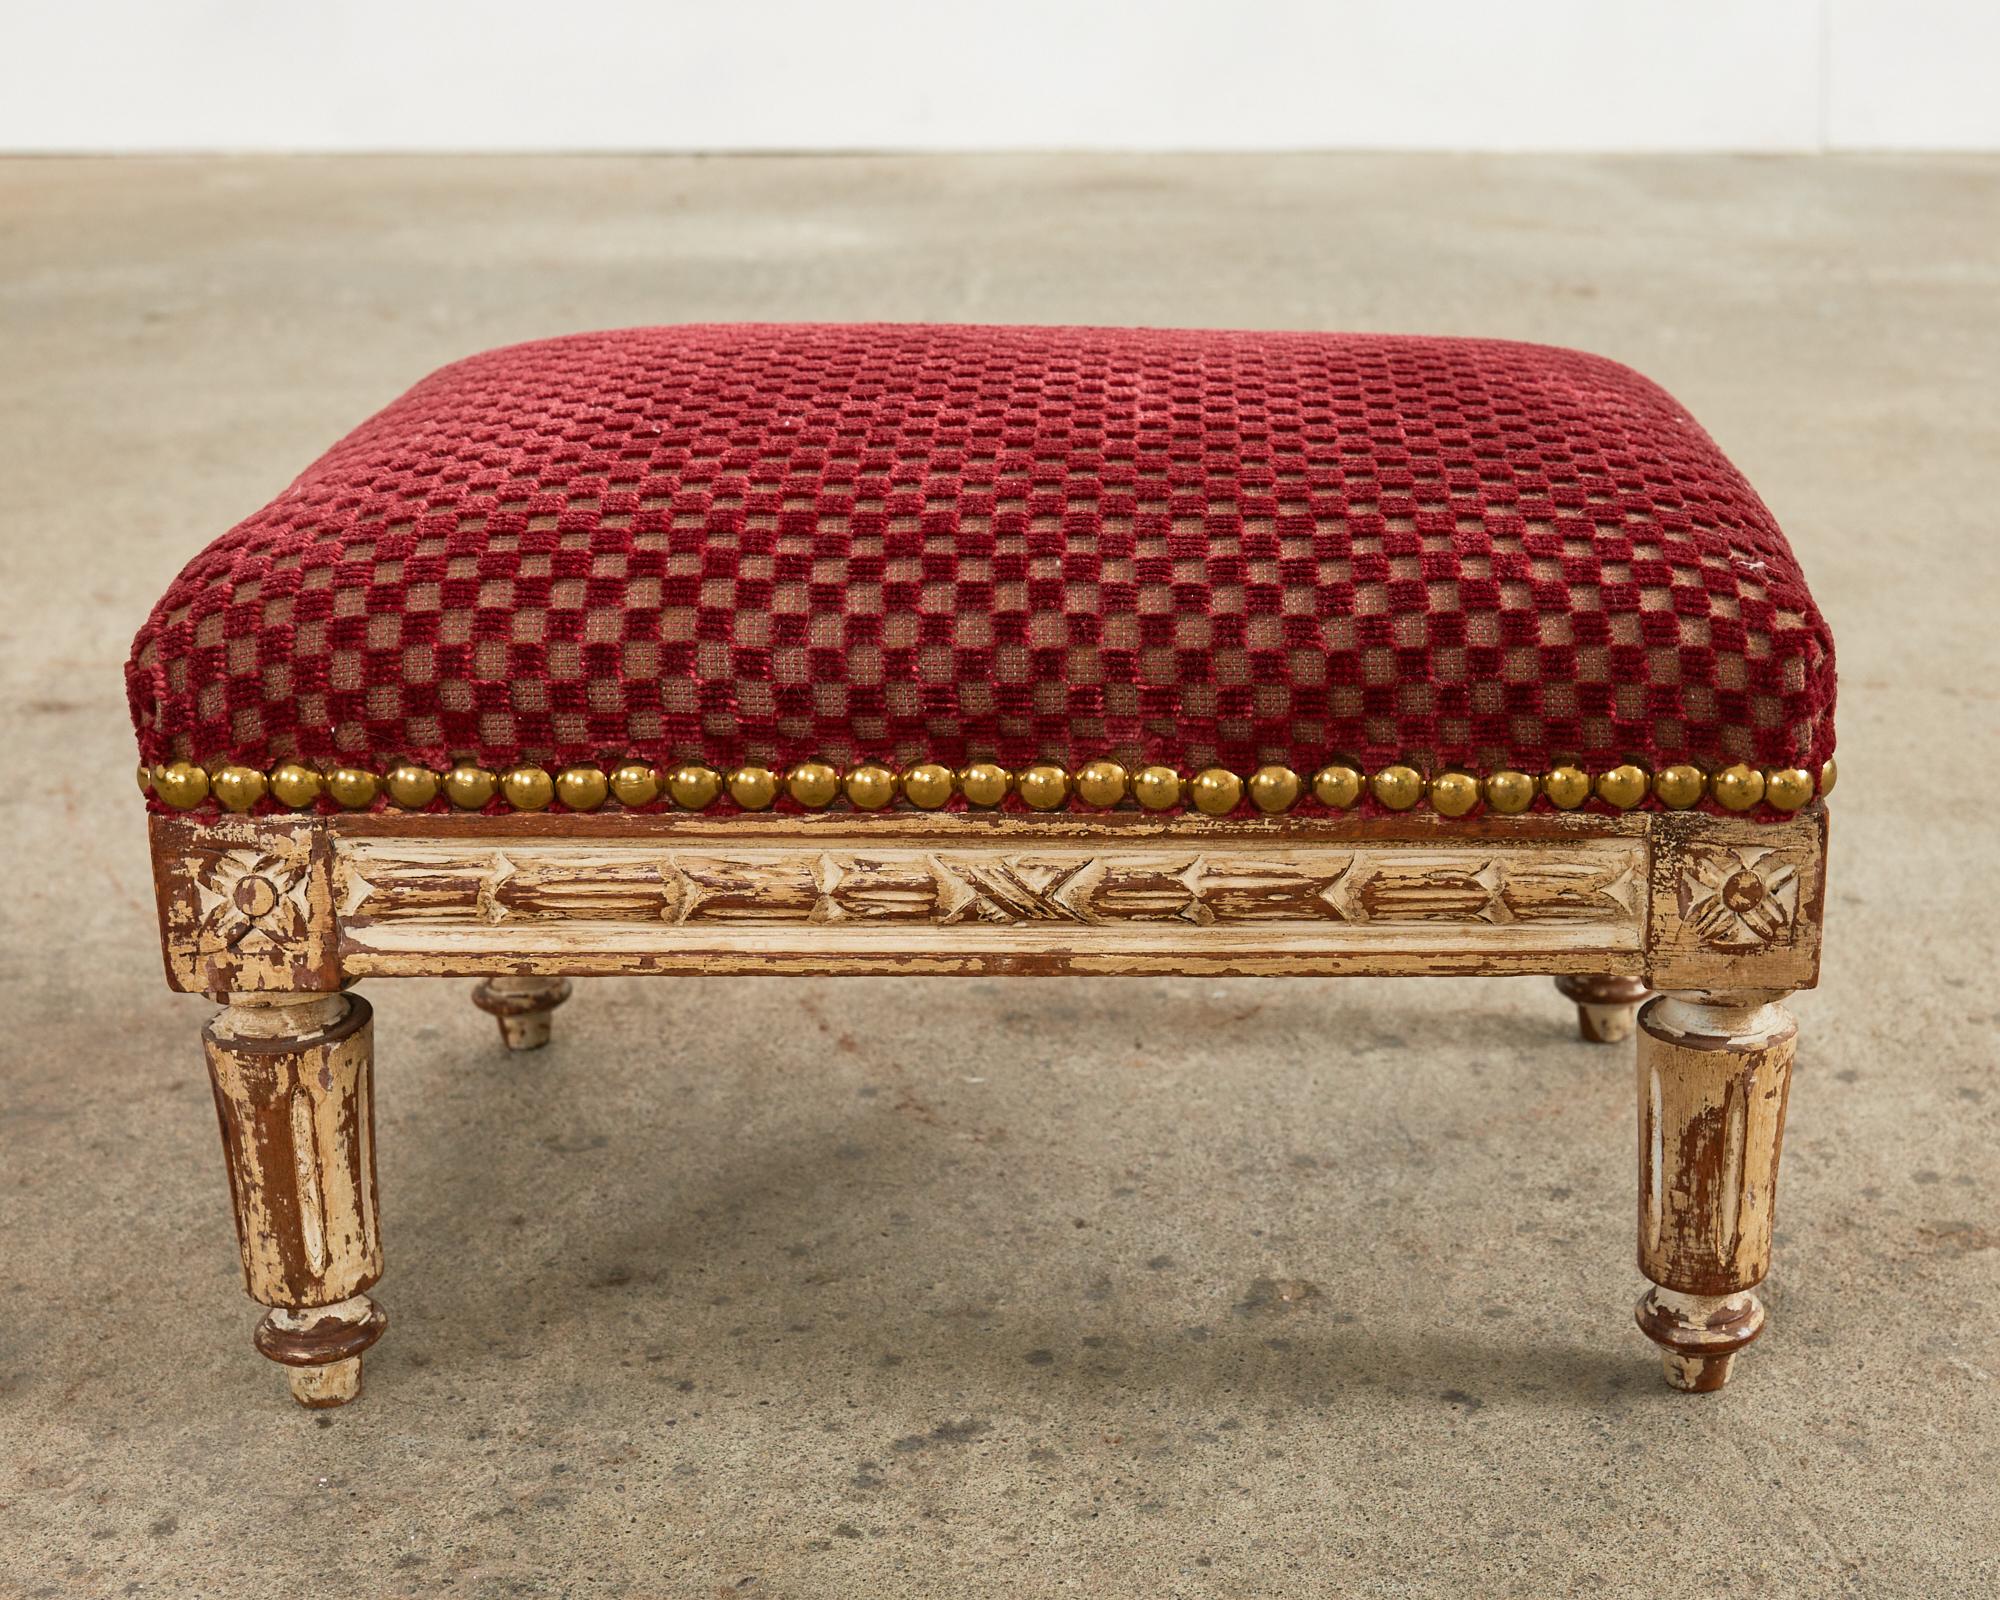 19th Century French Louis XVI Diminutive Painted Mahogany Footstool For Sale 12